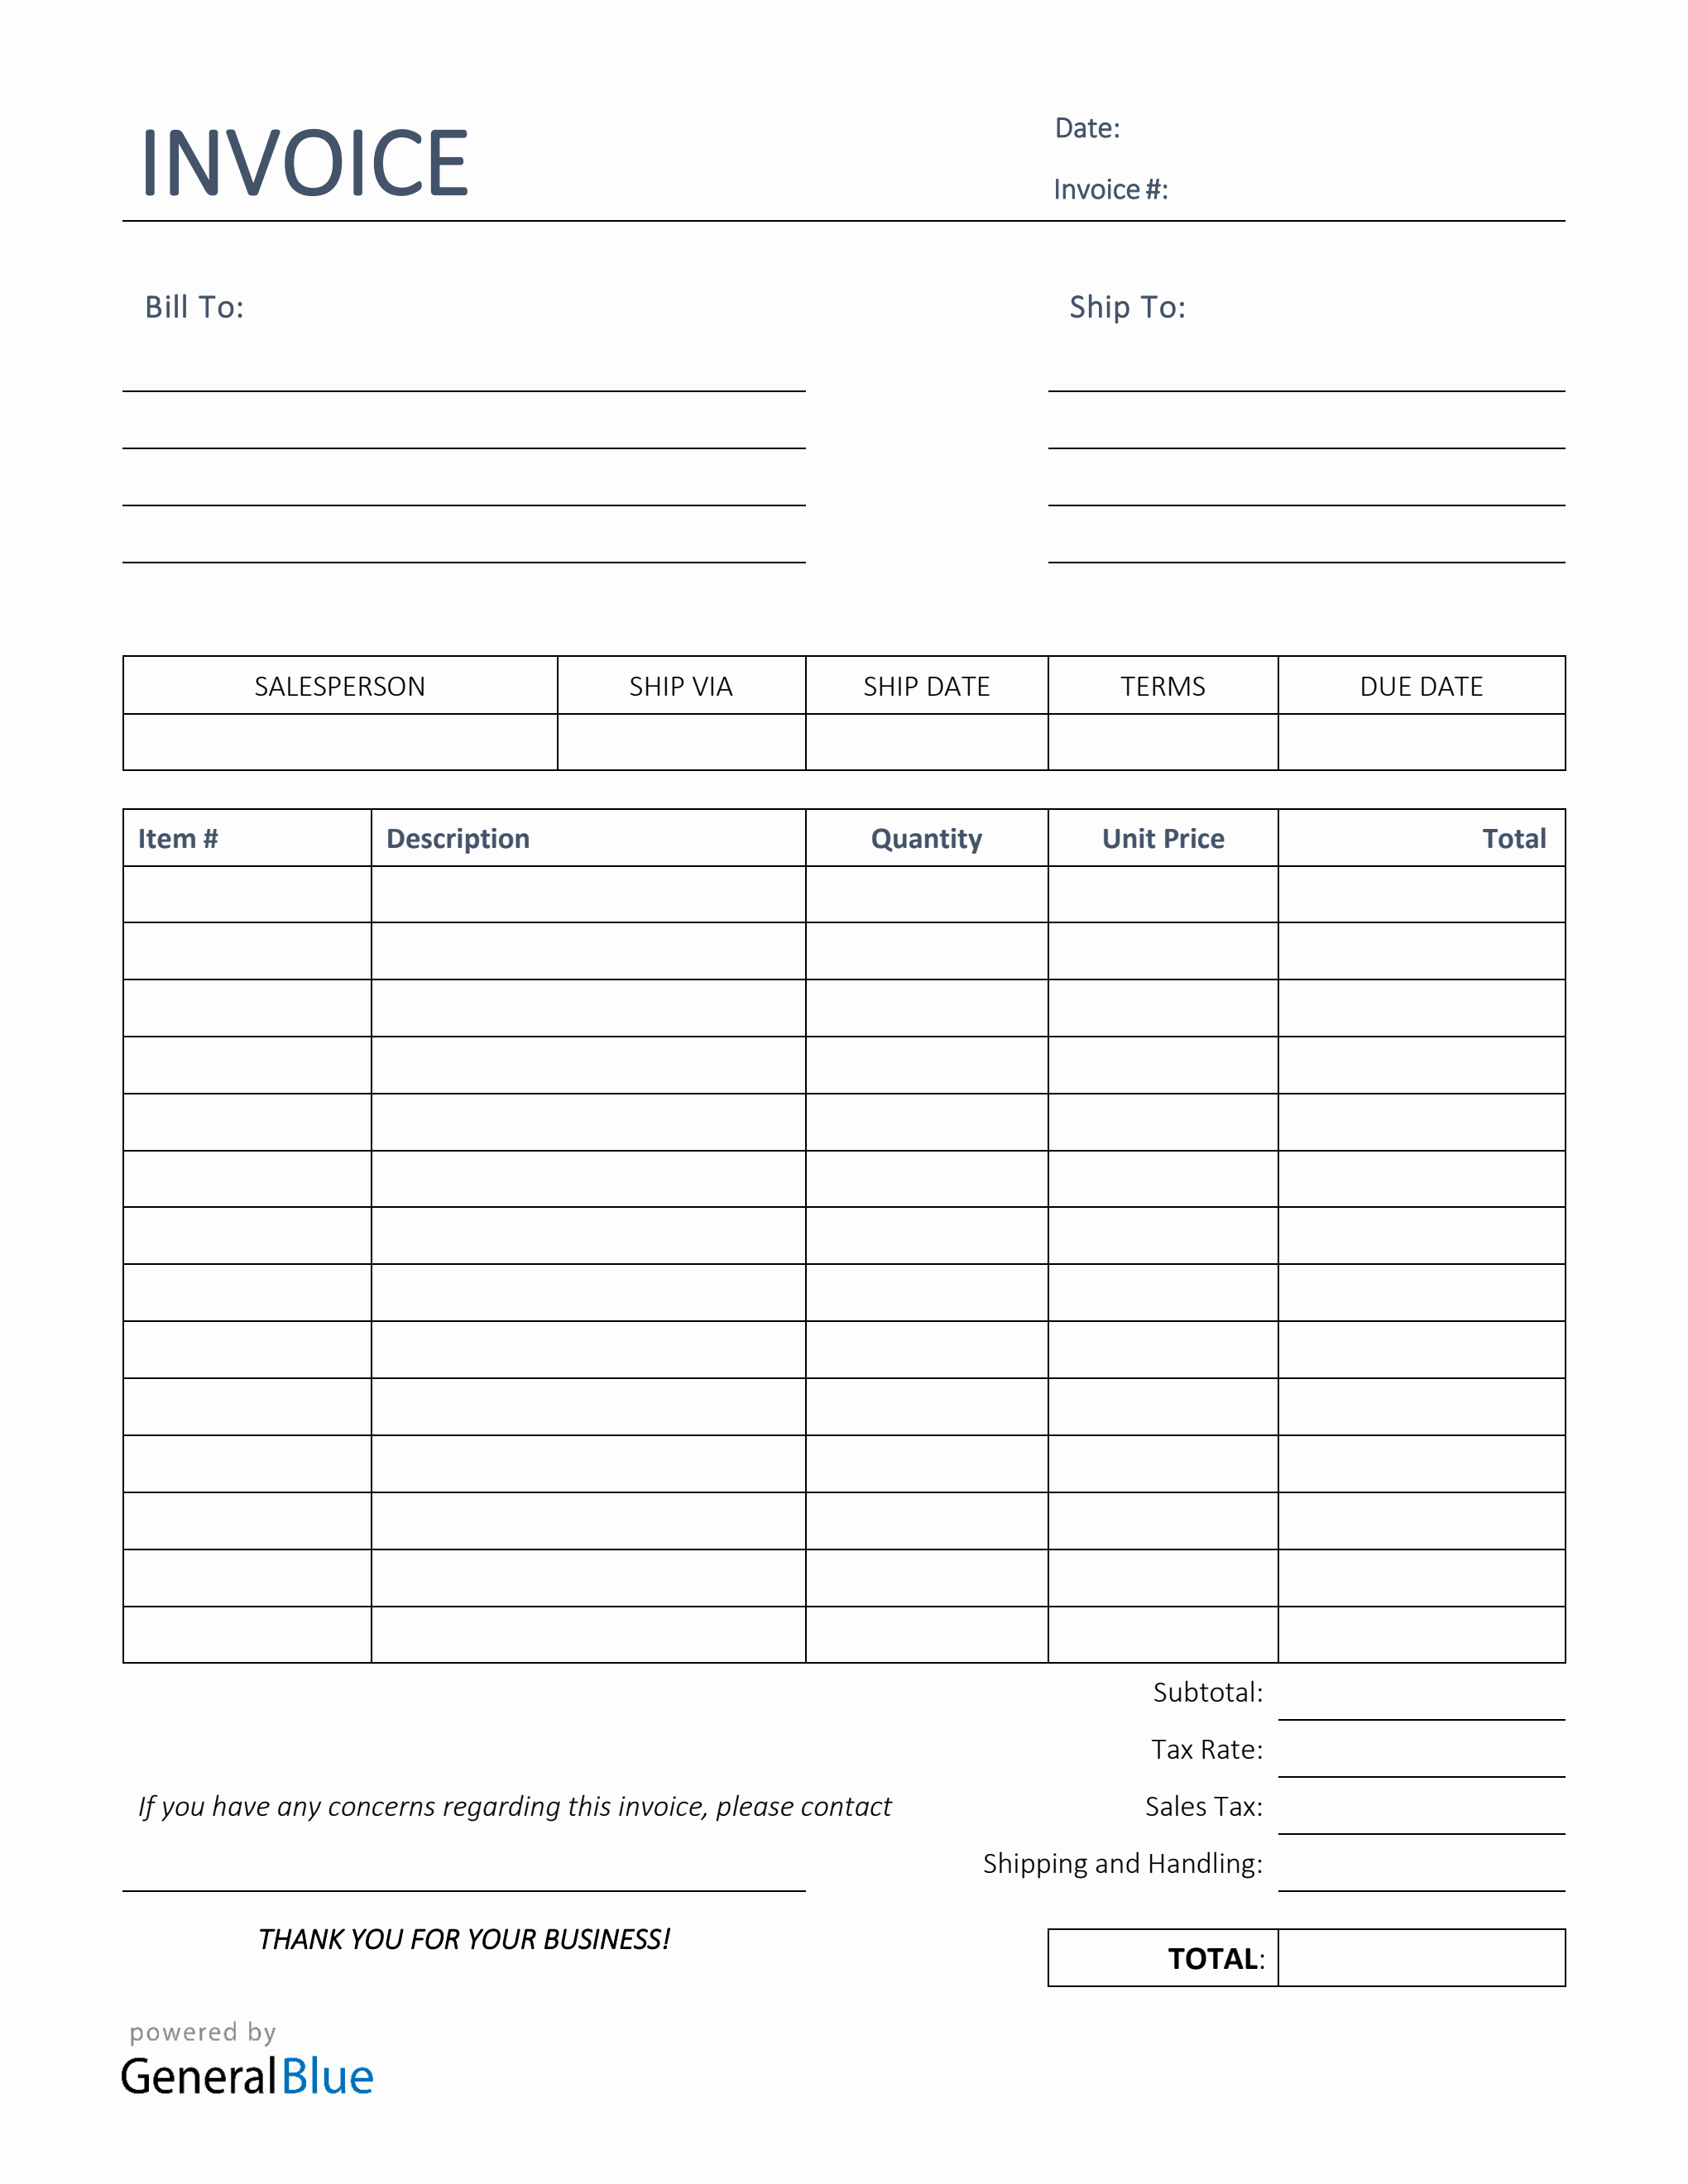 Sales Invoice Template in PDF (Simple)